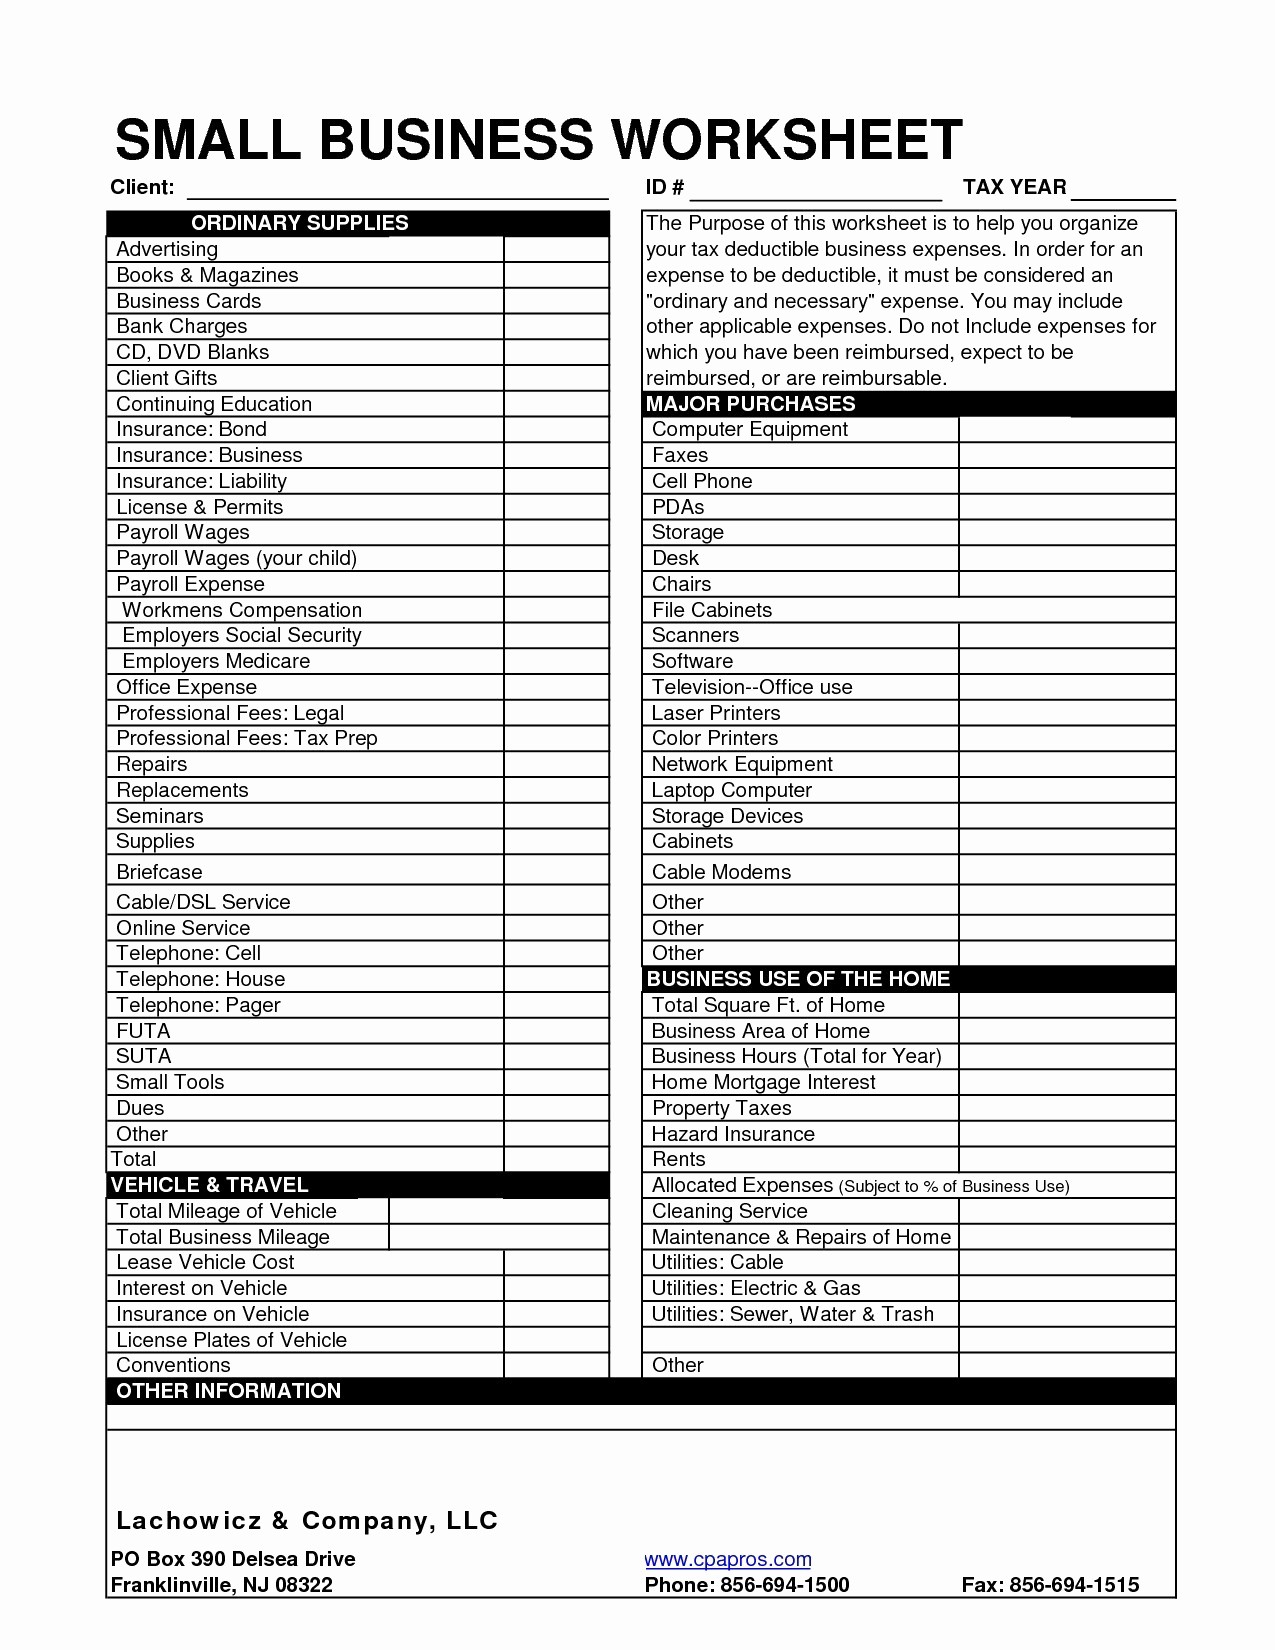 Itemized Deductions Worksheet For Small Business Elegant Tax Write